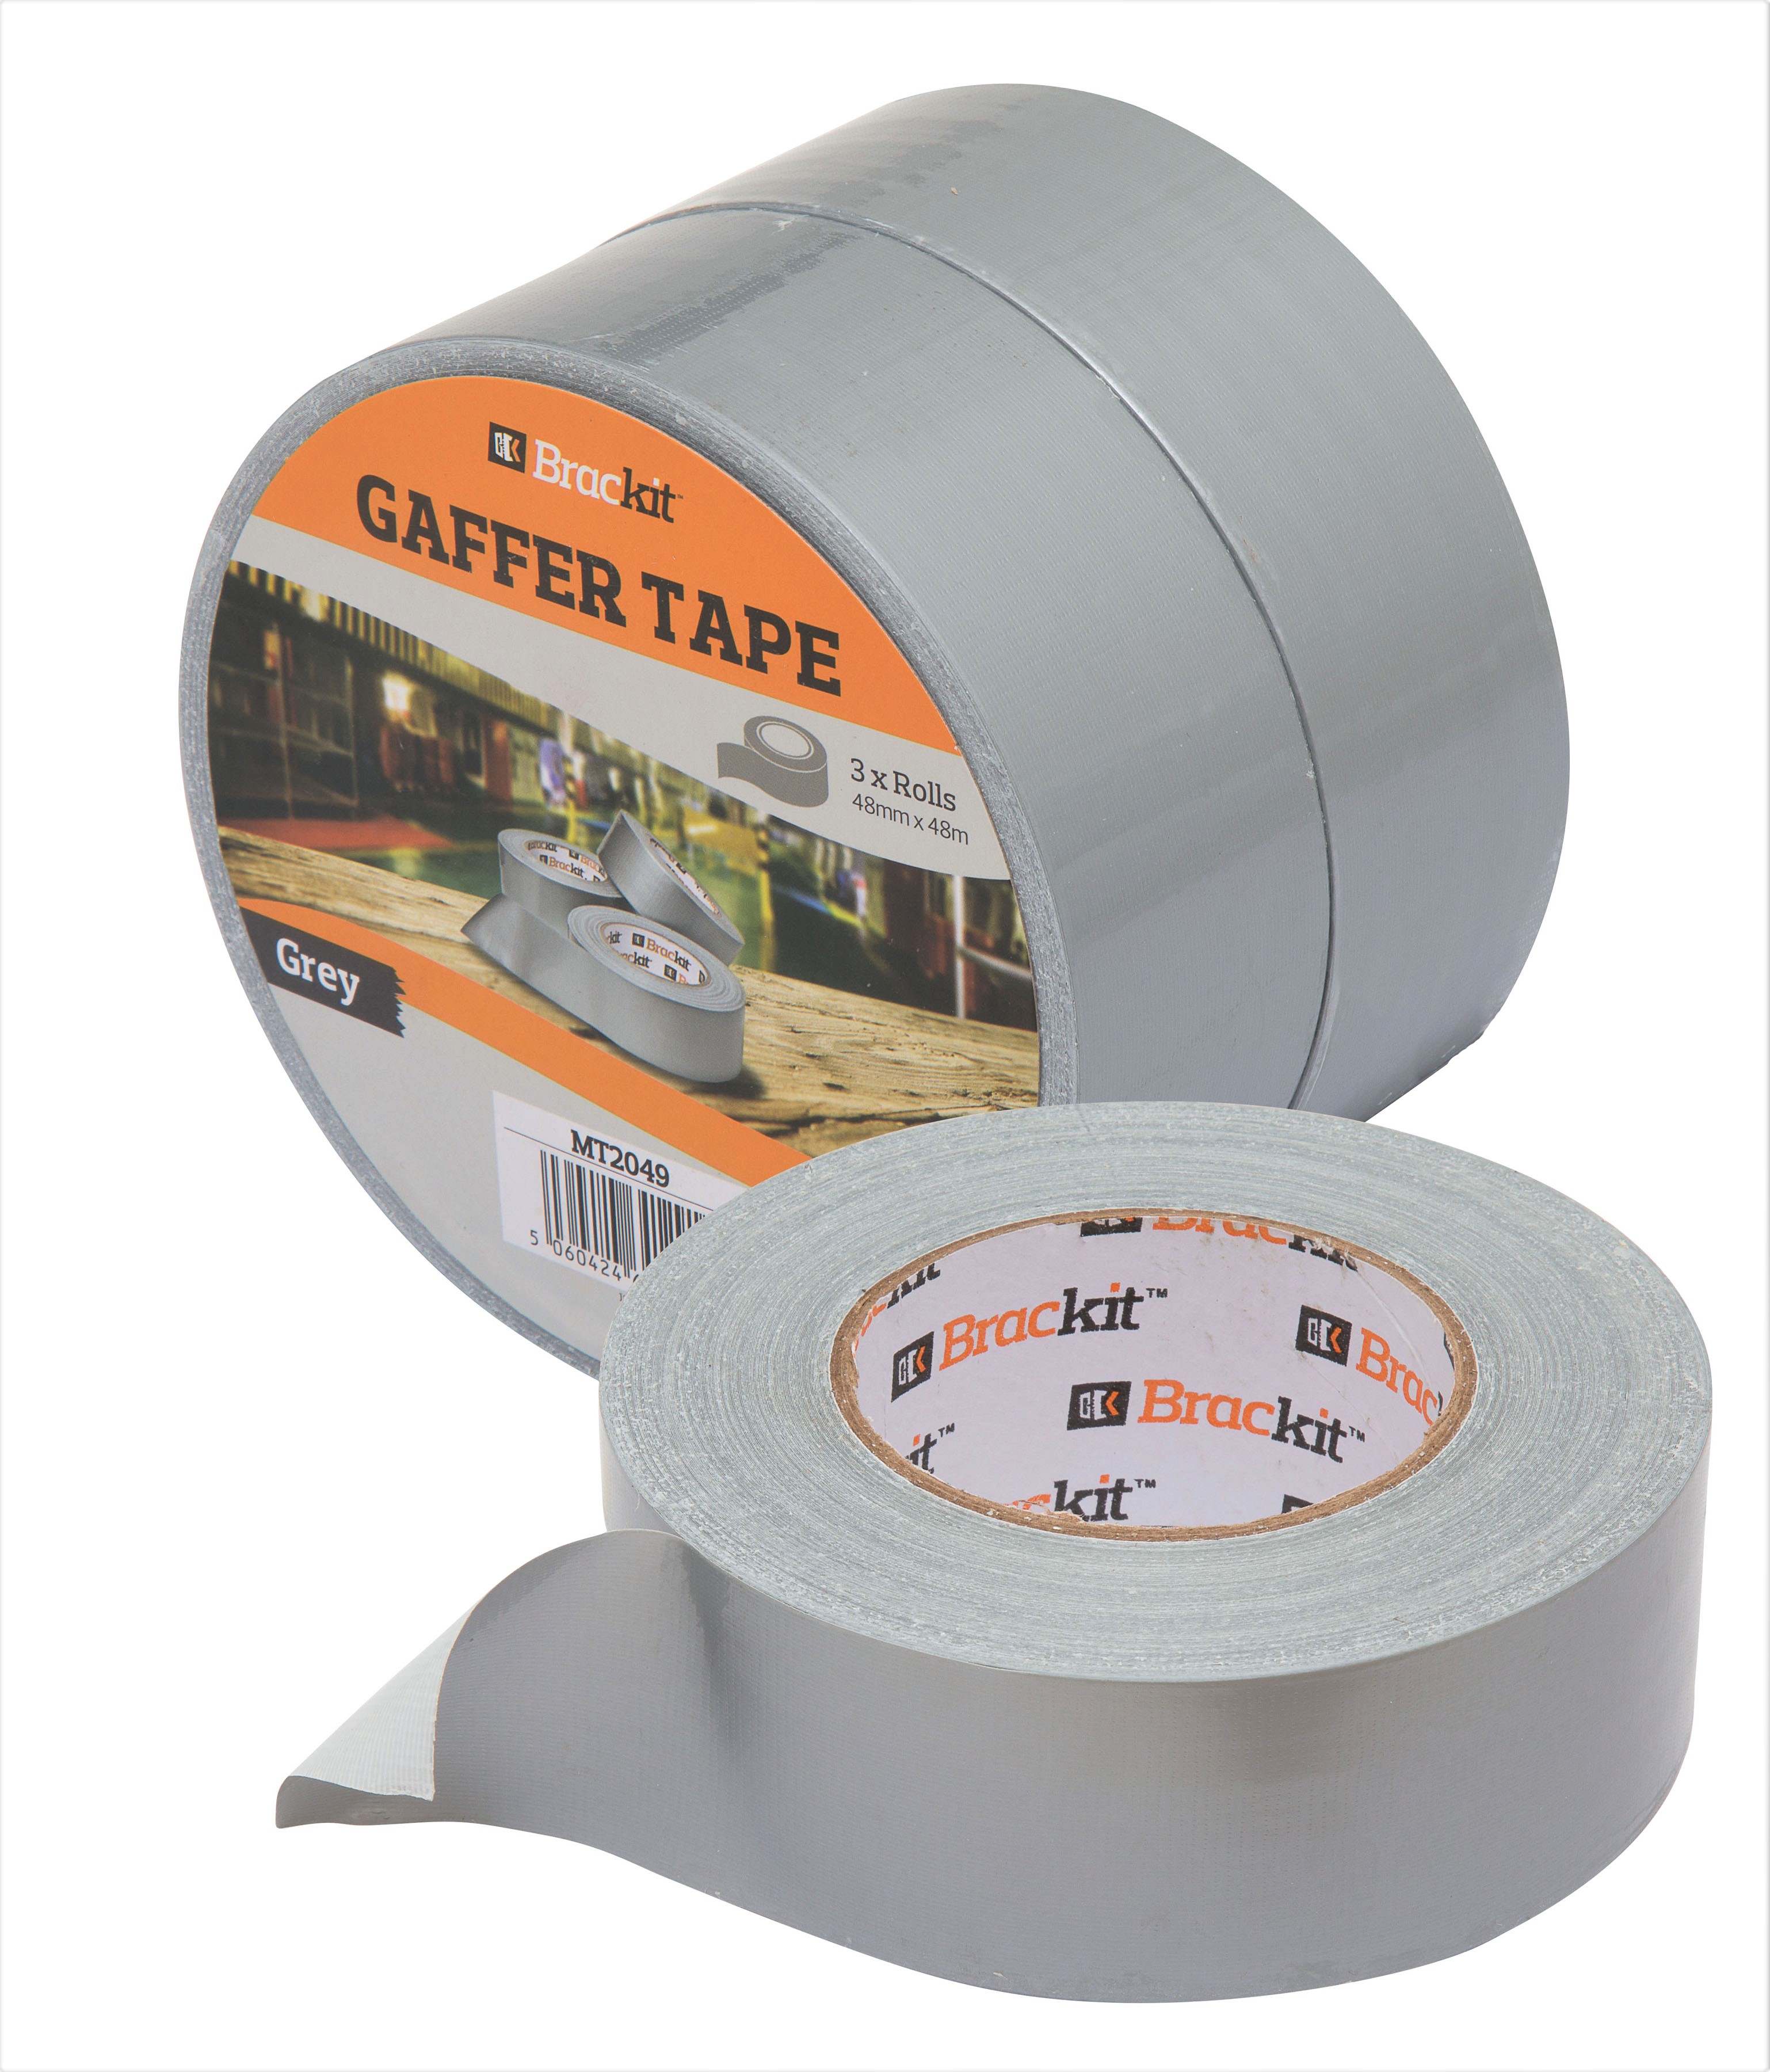 24 Rolls (8 x 3 packs) Heavy Duty Sliver 48mm x 50m Duct/ Gaffer Tape For Sealing, Reinforcing, Protecting, Binding & Labelling